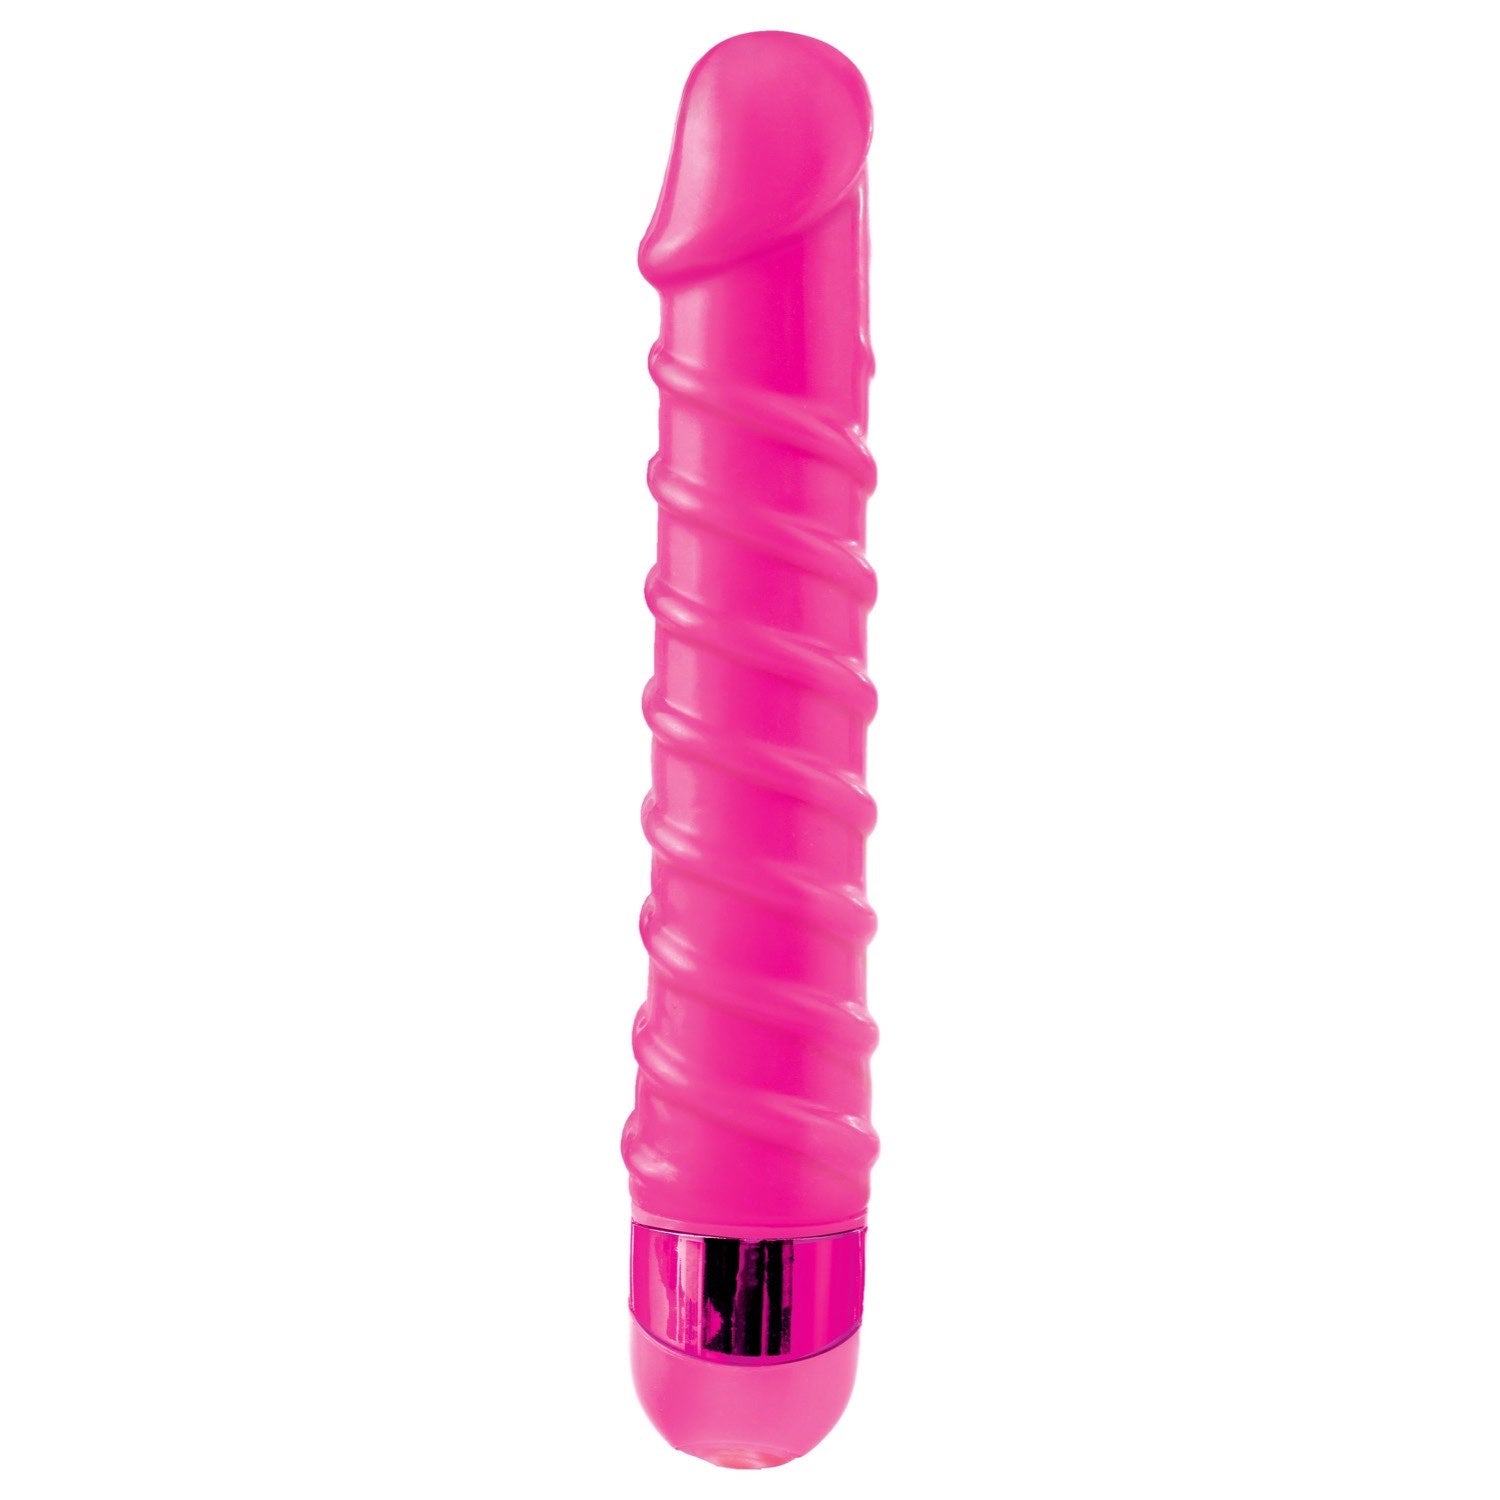 Classix Candy Twirl - Pink 16.5 cm Vibrator by Pipedream